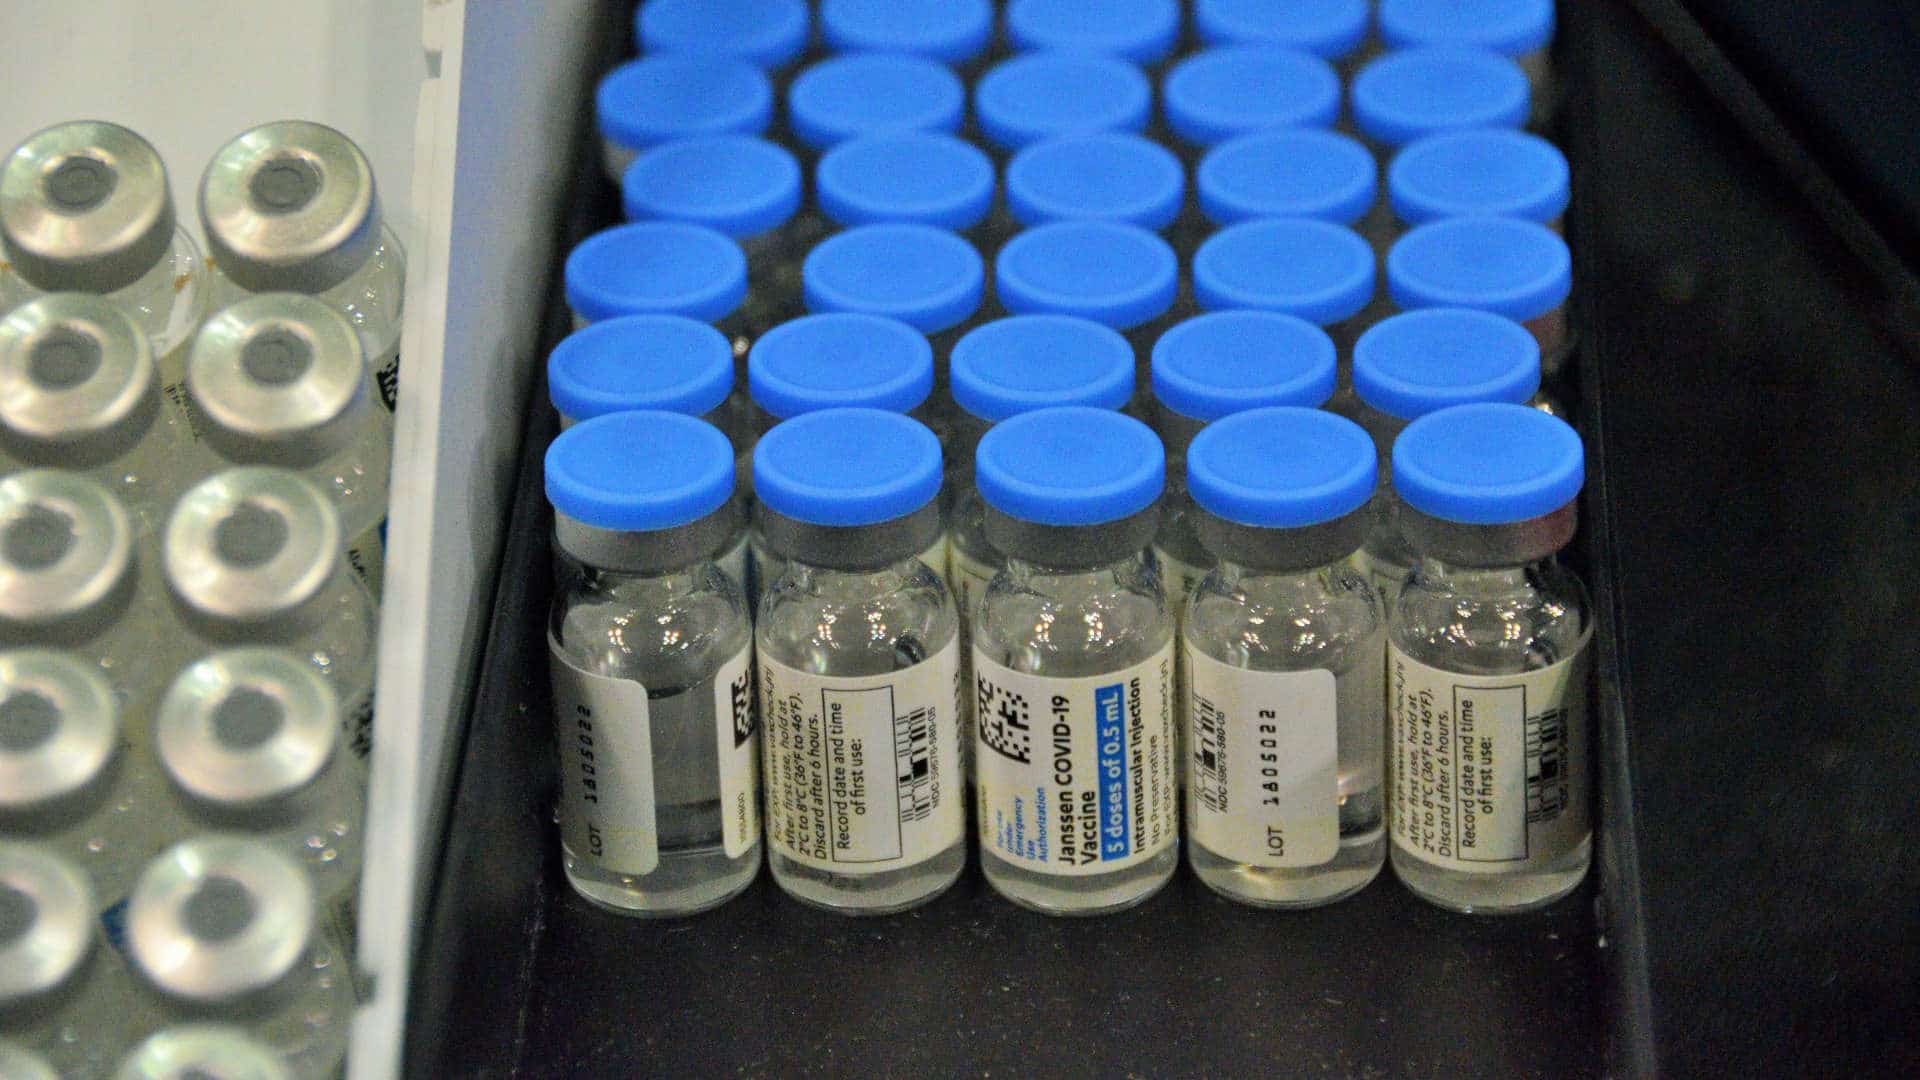 Vials of the Johnson & Johnson Covid-19 vaccine, administered at the Jacob Javits Center in New York City in March 2021.